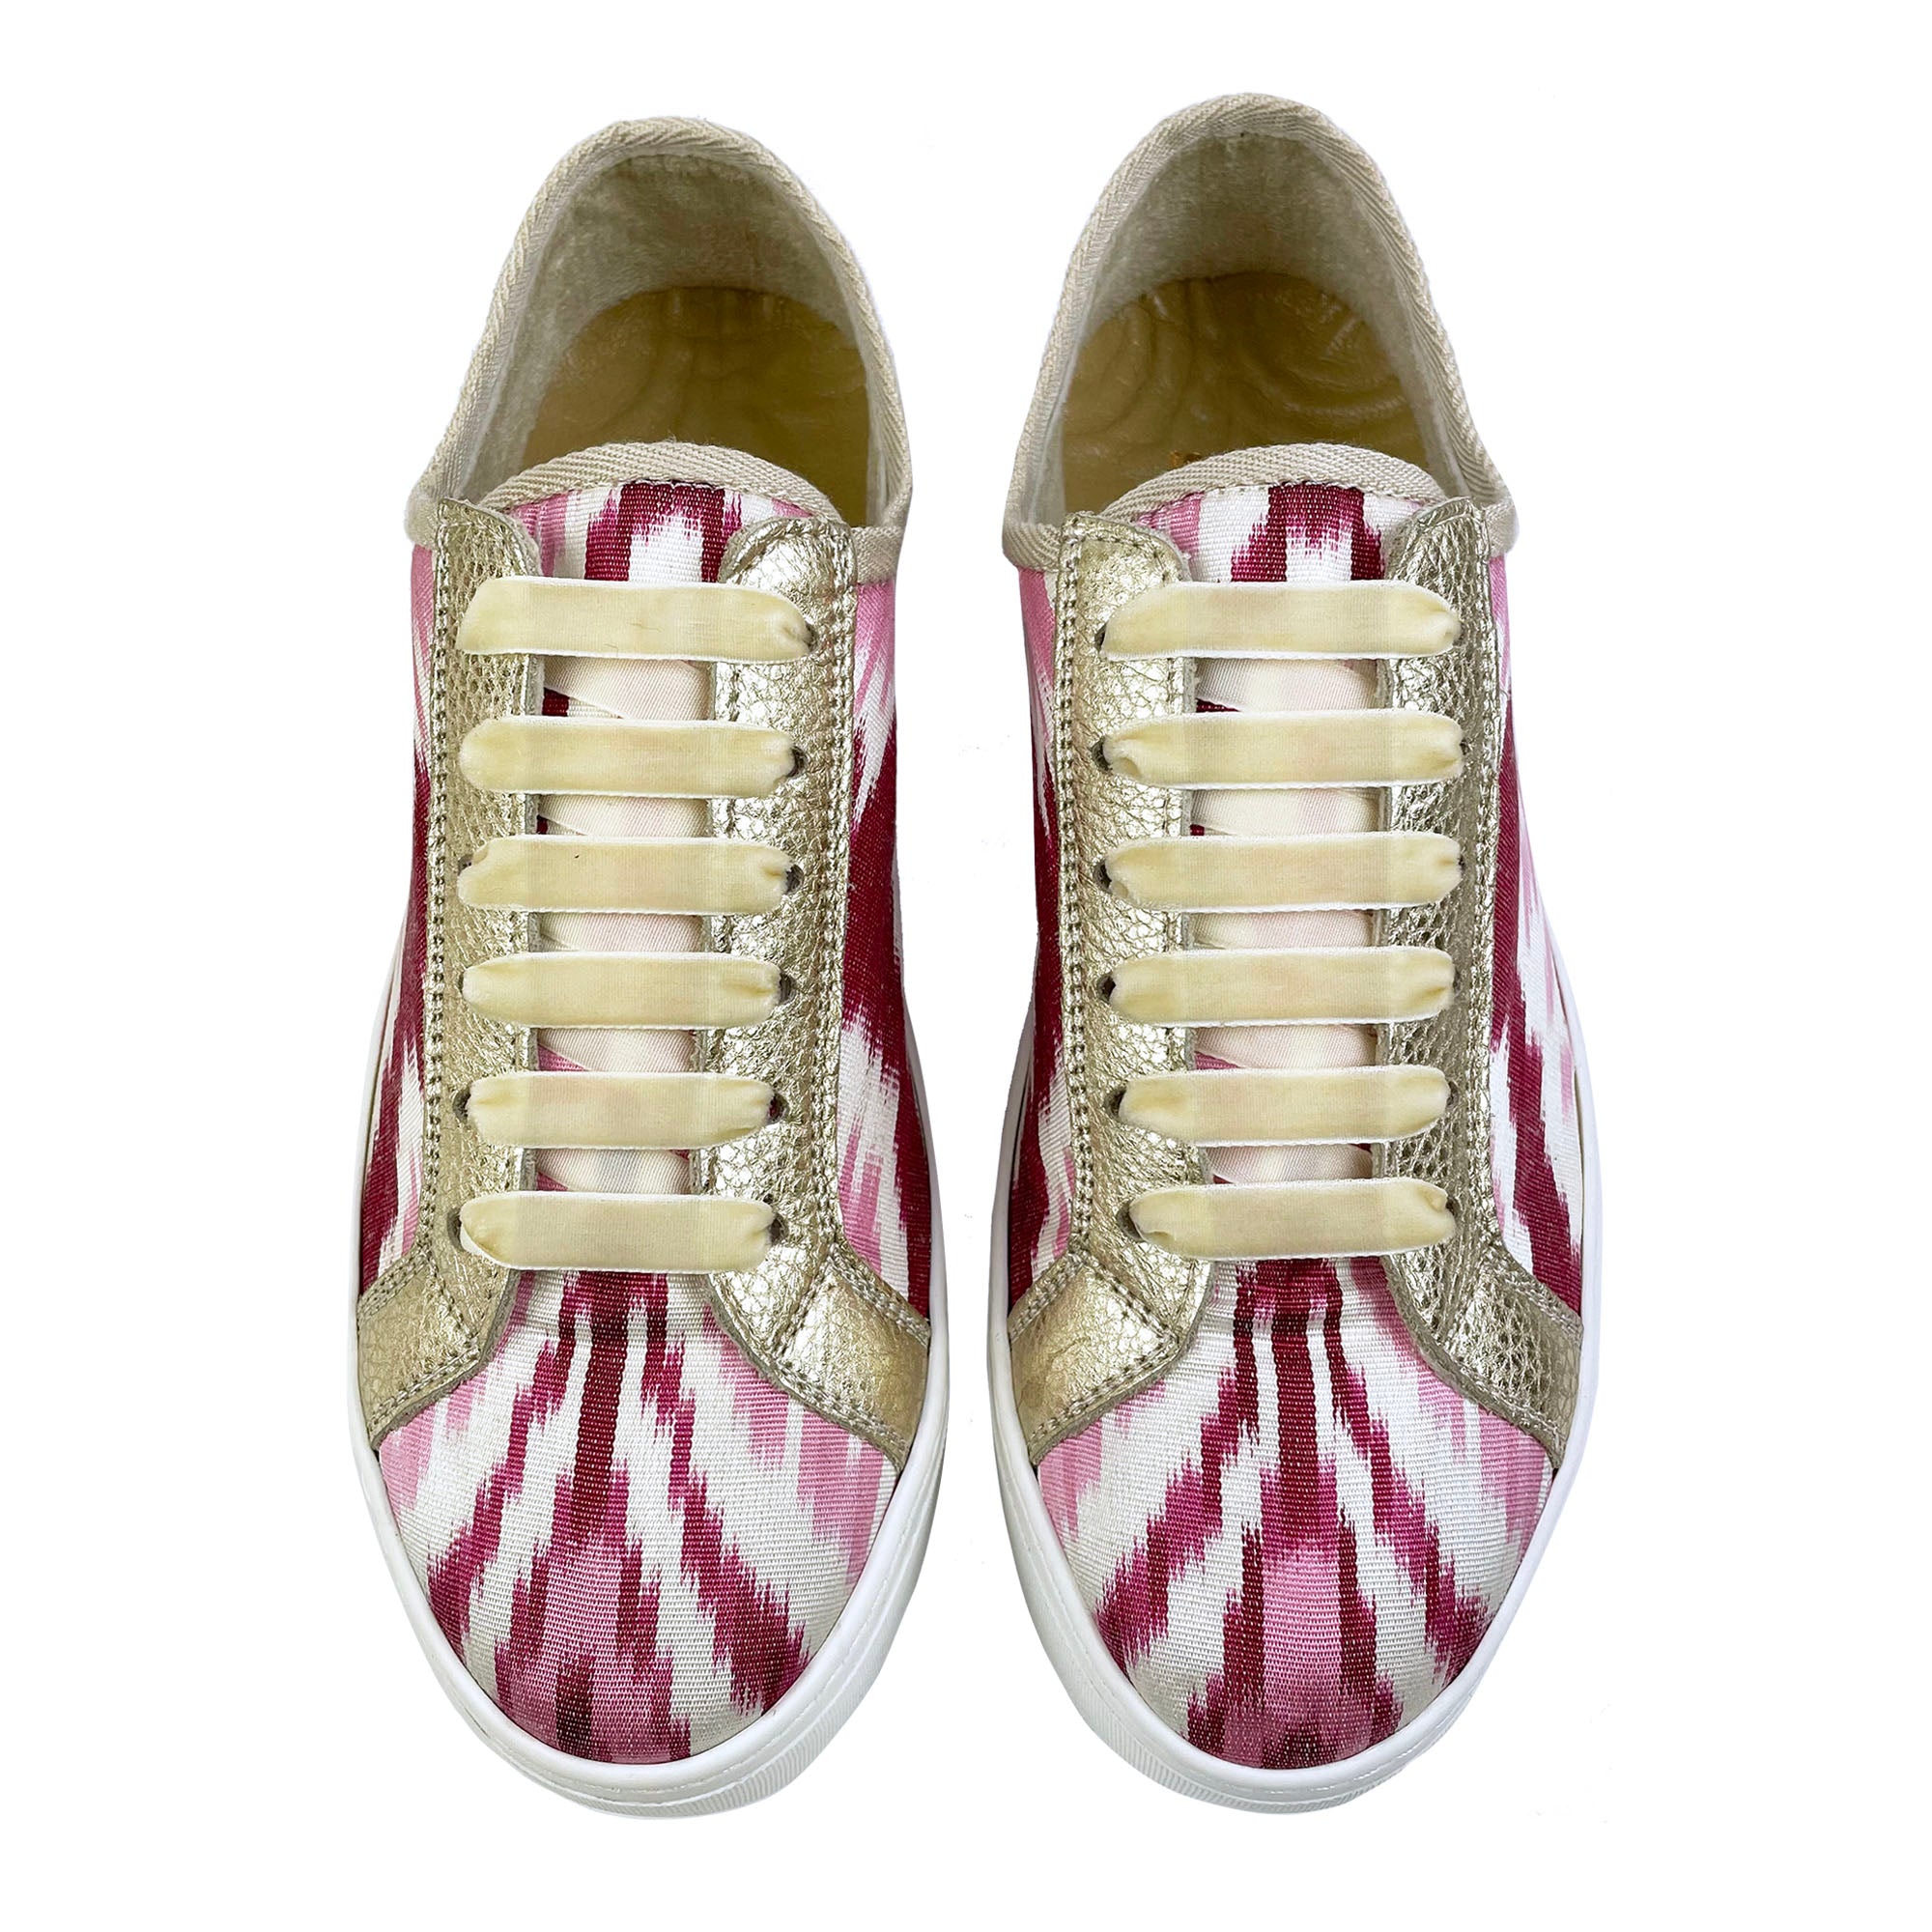 Pink, red and white Ikat silk platform sneakers with gold metallic leather and cream velvet shoelaces